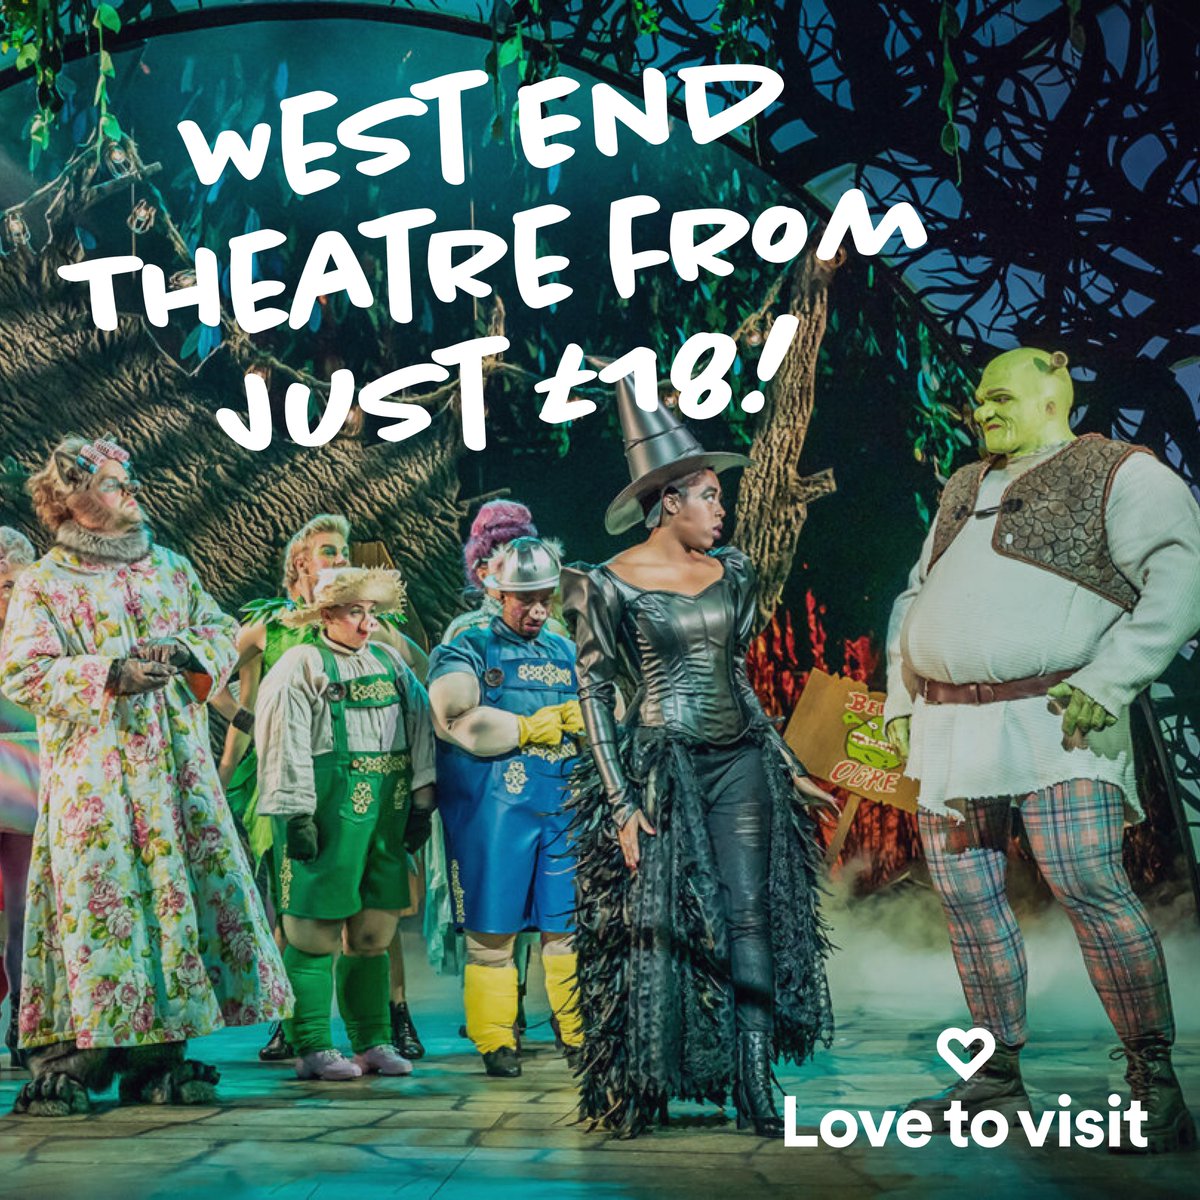 West End Theatre Shows starting from Just £18! Dive into the magic of West End theatres with award-winning shows like Stranger Things, Shrek the Musical, Sister Act, Two Strangers, and more, starting from just £18! 😍 🌐lovetovisit.com/uk-promotions